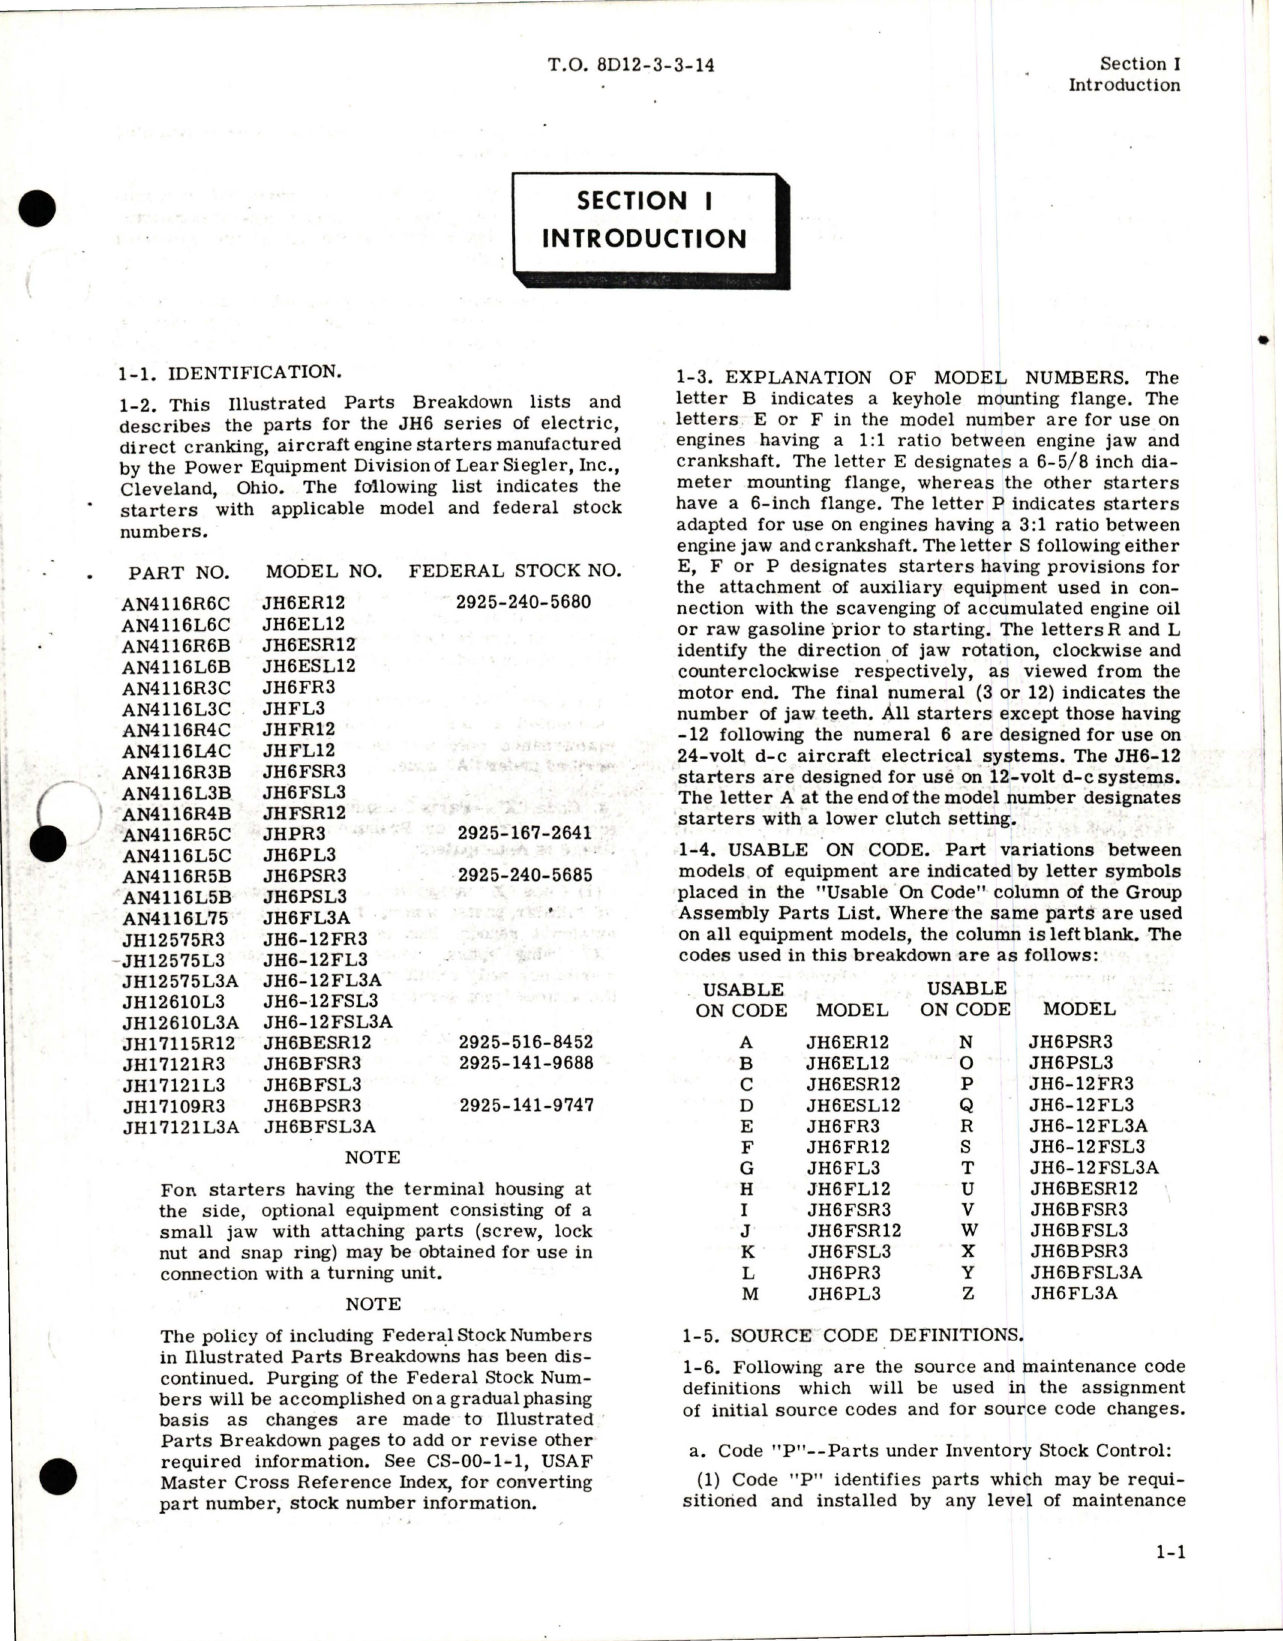 Sample page 5 from AirCorps Library document: Illustrated Parts Breakdown for Aircraft Engine Starters